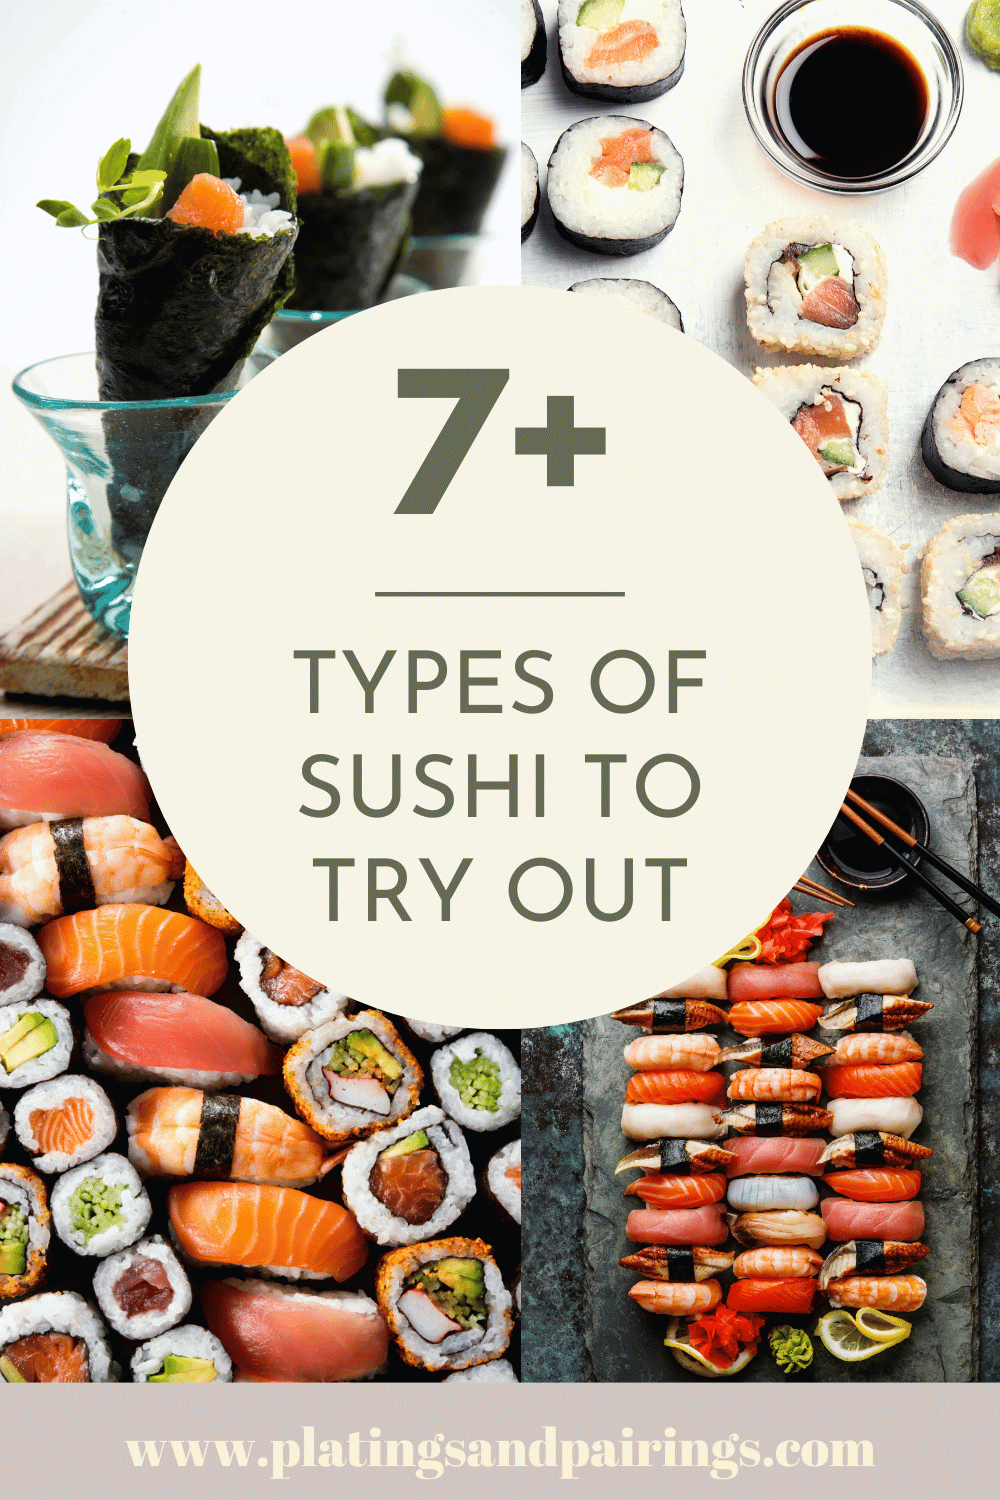 Collage of types of sushi with text overlay.